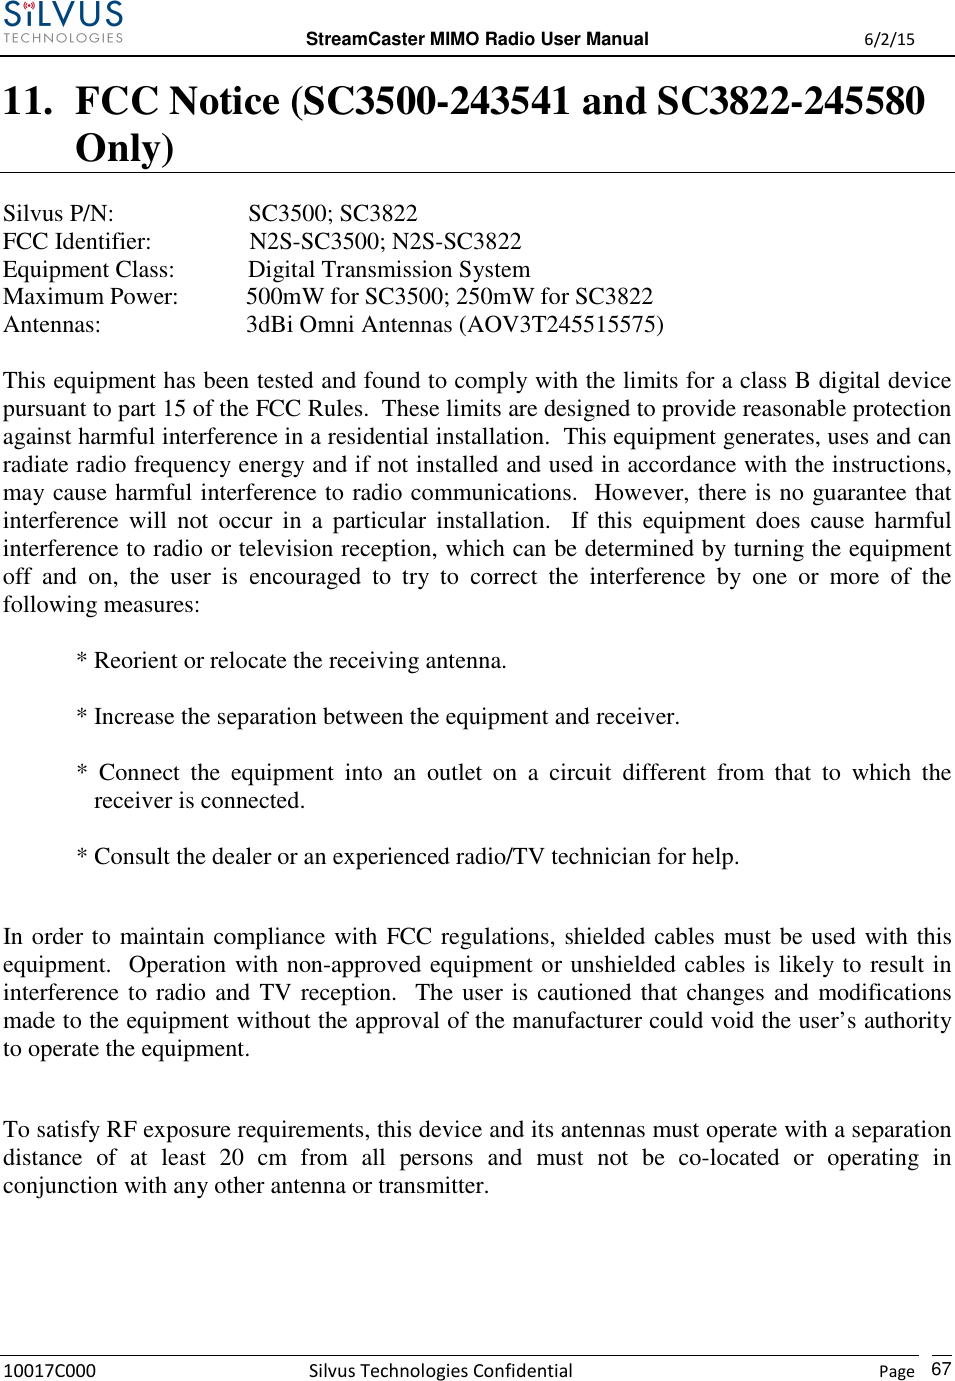  StreamCaster MIMO Radio User Manual  6/2/15 10017C000 Silvus Technologies Confidential    Page   67 11. FCC Notice (SC3500-243541 and SC3822-245580 Only)  Silvus P/N:                      SC3500; SC3822 FCC Identifier:                N2S-SC3500; N2S-SC3822 Equipment Class:            Digital Transmission System Maximum Power:           500mW for SC3500; 250mW for SC3822 Antennas:        3dBi Omni Antennas (AOV3T245515575)  This equipment has been tested and found to comply with the limits for a class B digital device pursuant to part 15 of the FCC Rules.  These limits are designed to provide reasonable protection against harmful interference in a residential installation.  This equipment generates, uses and can radiate radio frequency energy and if not installed and used in accordance with the instructions, may cause harmful interference to radio communications.  However, there is no guarantee that interference  will  not  occur  in  a  particular  installation.    If  this  equipment  does  cause  harmful interference to radio or television reception, which can be determined by turning the equipment off  and  on,  the  user  is  encouraged  to  try  to  correct  the  interference  by  one  or  more  of  the following measures:  * Reorient or relocate the receiving antenna.  * Increase the separation between the equipment and receiver.  *  Connect  the  equipment  into  an  outlet  on  a  circuit  different  from  that  to  which  the receiver is connected.  * Consult the dealer or an experienced radio/TV technician for help.  In order to maintain compliance with FCC regulations, shielded cables must be used with this equipment.  Operation with non-approved equipment or unshielded cables is likely to result in interference to radio and TV reception.  The user is cautioned that changes and modifications made to the equipment without the approval of the manufacturer could void the user’s authority to operate the equipment.  To satisfy RF exposure requirements, this device and its antennas must operate with a separation distance  of  at  least  20  cm  from  all  persons  and  must  not  be  co-located  or  operating  in conjunction with any other antenna or transmitter.    